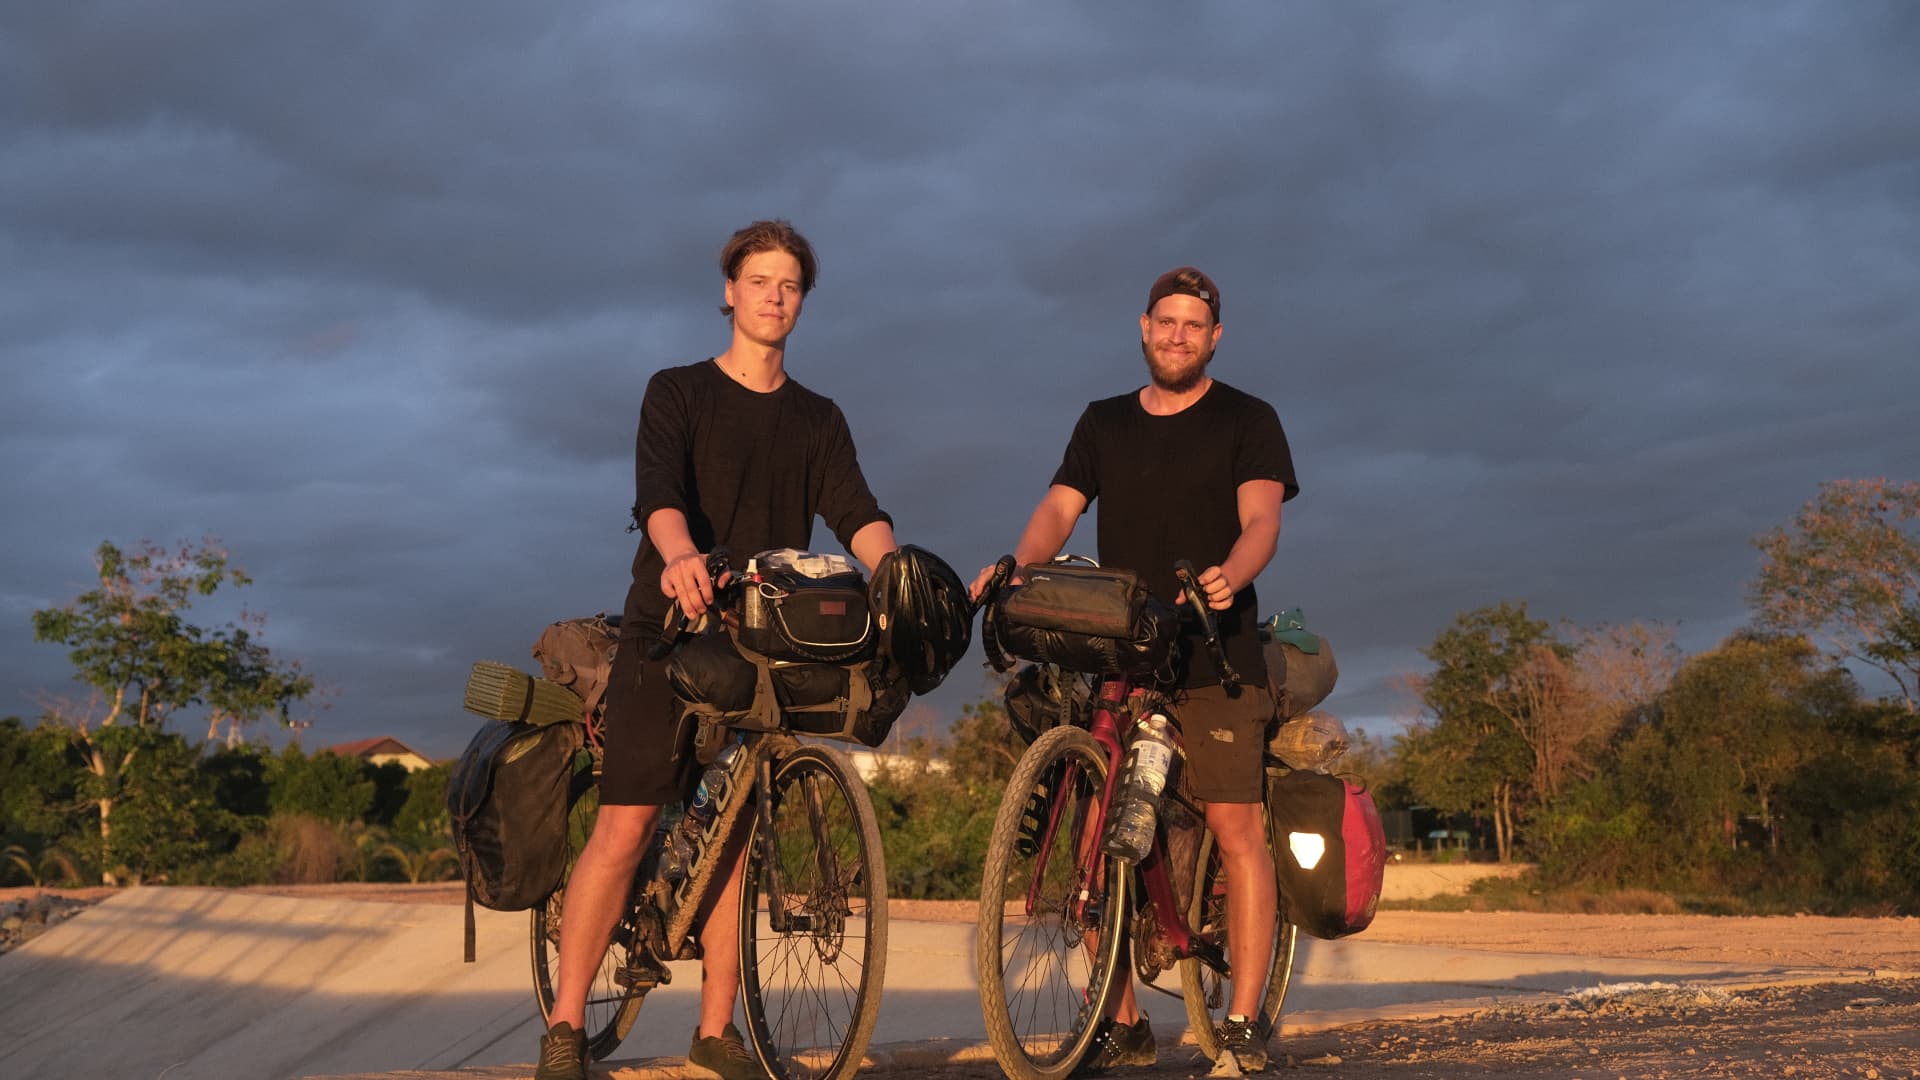 To escape the rat race, this pair cycled 15,000 km together the route from Finland to Singapore